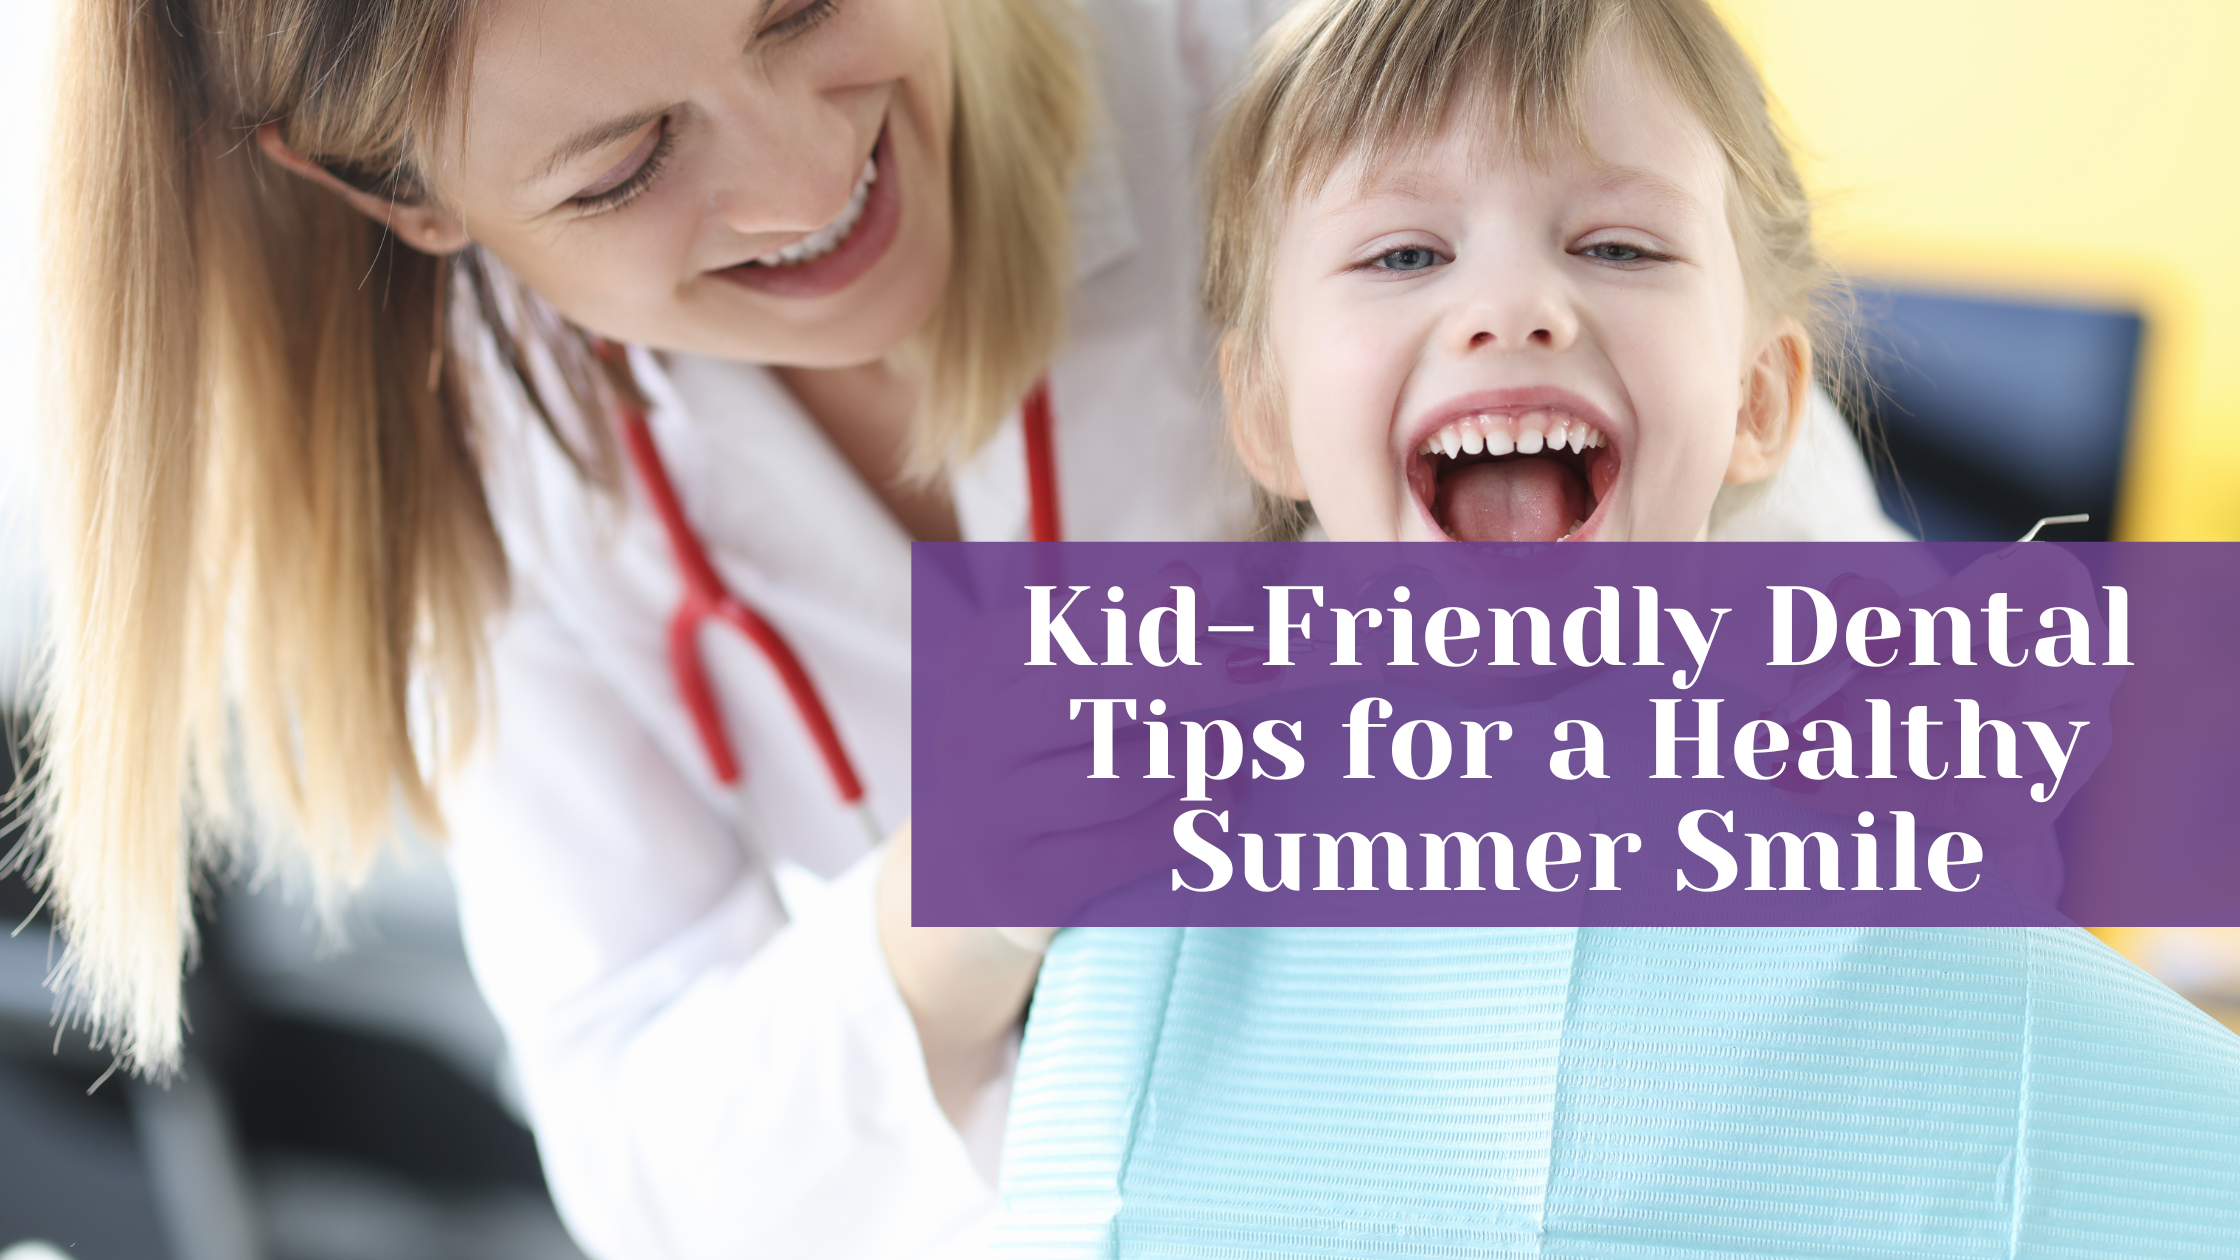 Kid-Friendly Dental Tips for a Healthy Summer Smile